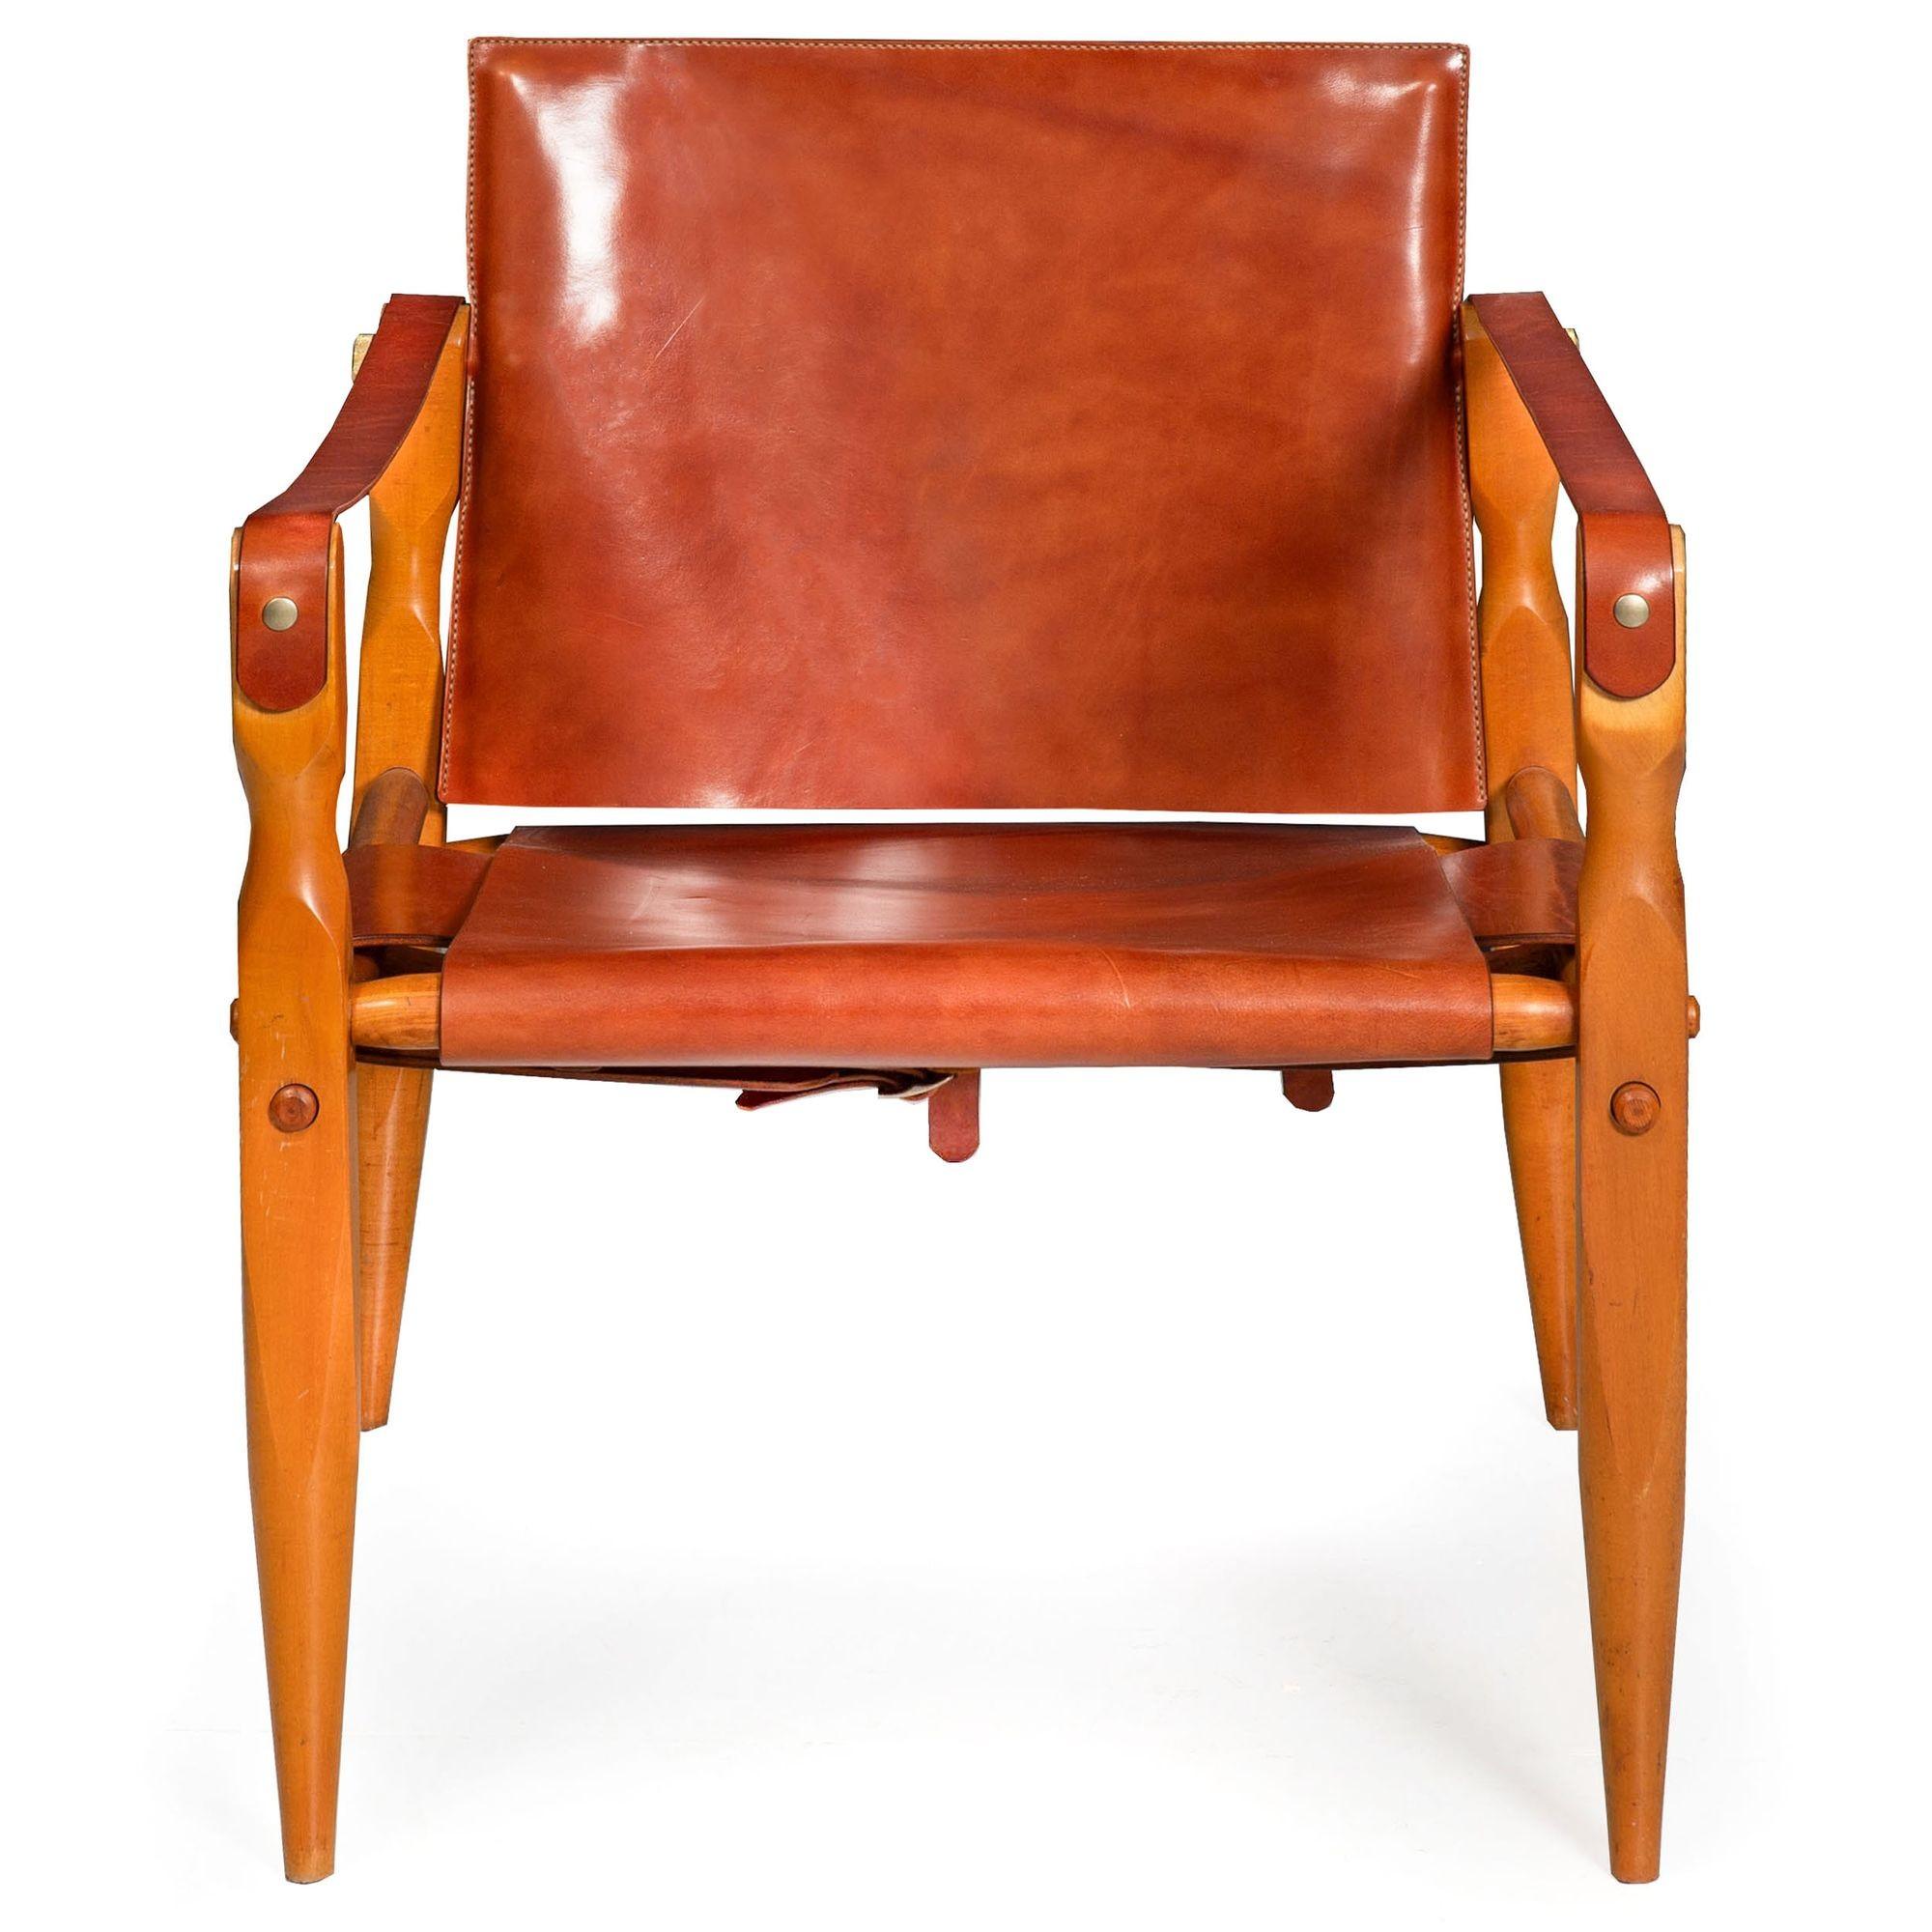 SCANDINAVIAN MODERN MAPLE & LEATHER SAFARI CHAIRS ATTRIBUTED TO WILHELM KIENZLE
Circa 1970  unmarked  brand new expertly crafted leather and custom machined hardware  a pair to this chair may still remain available
Item # 306YRC27L-2

An absolutely